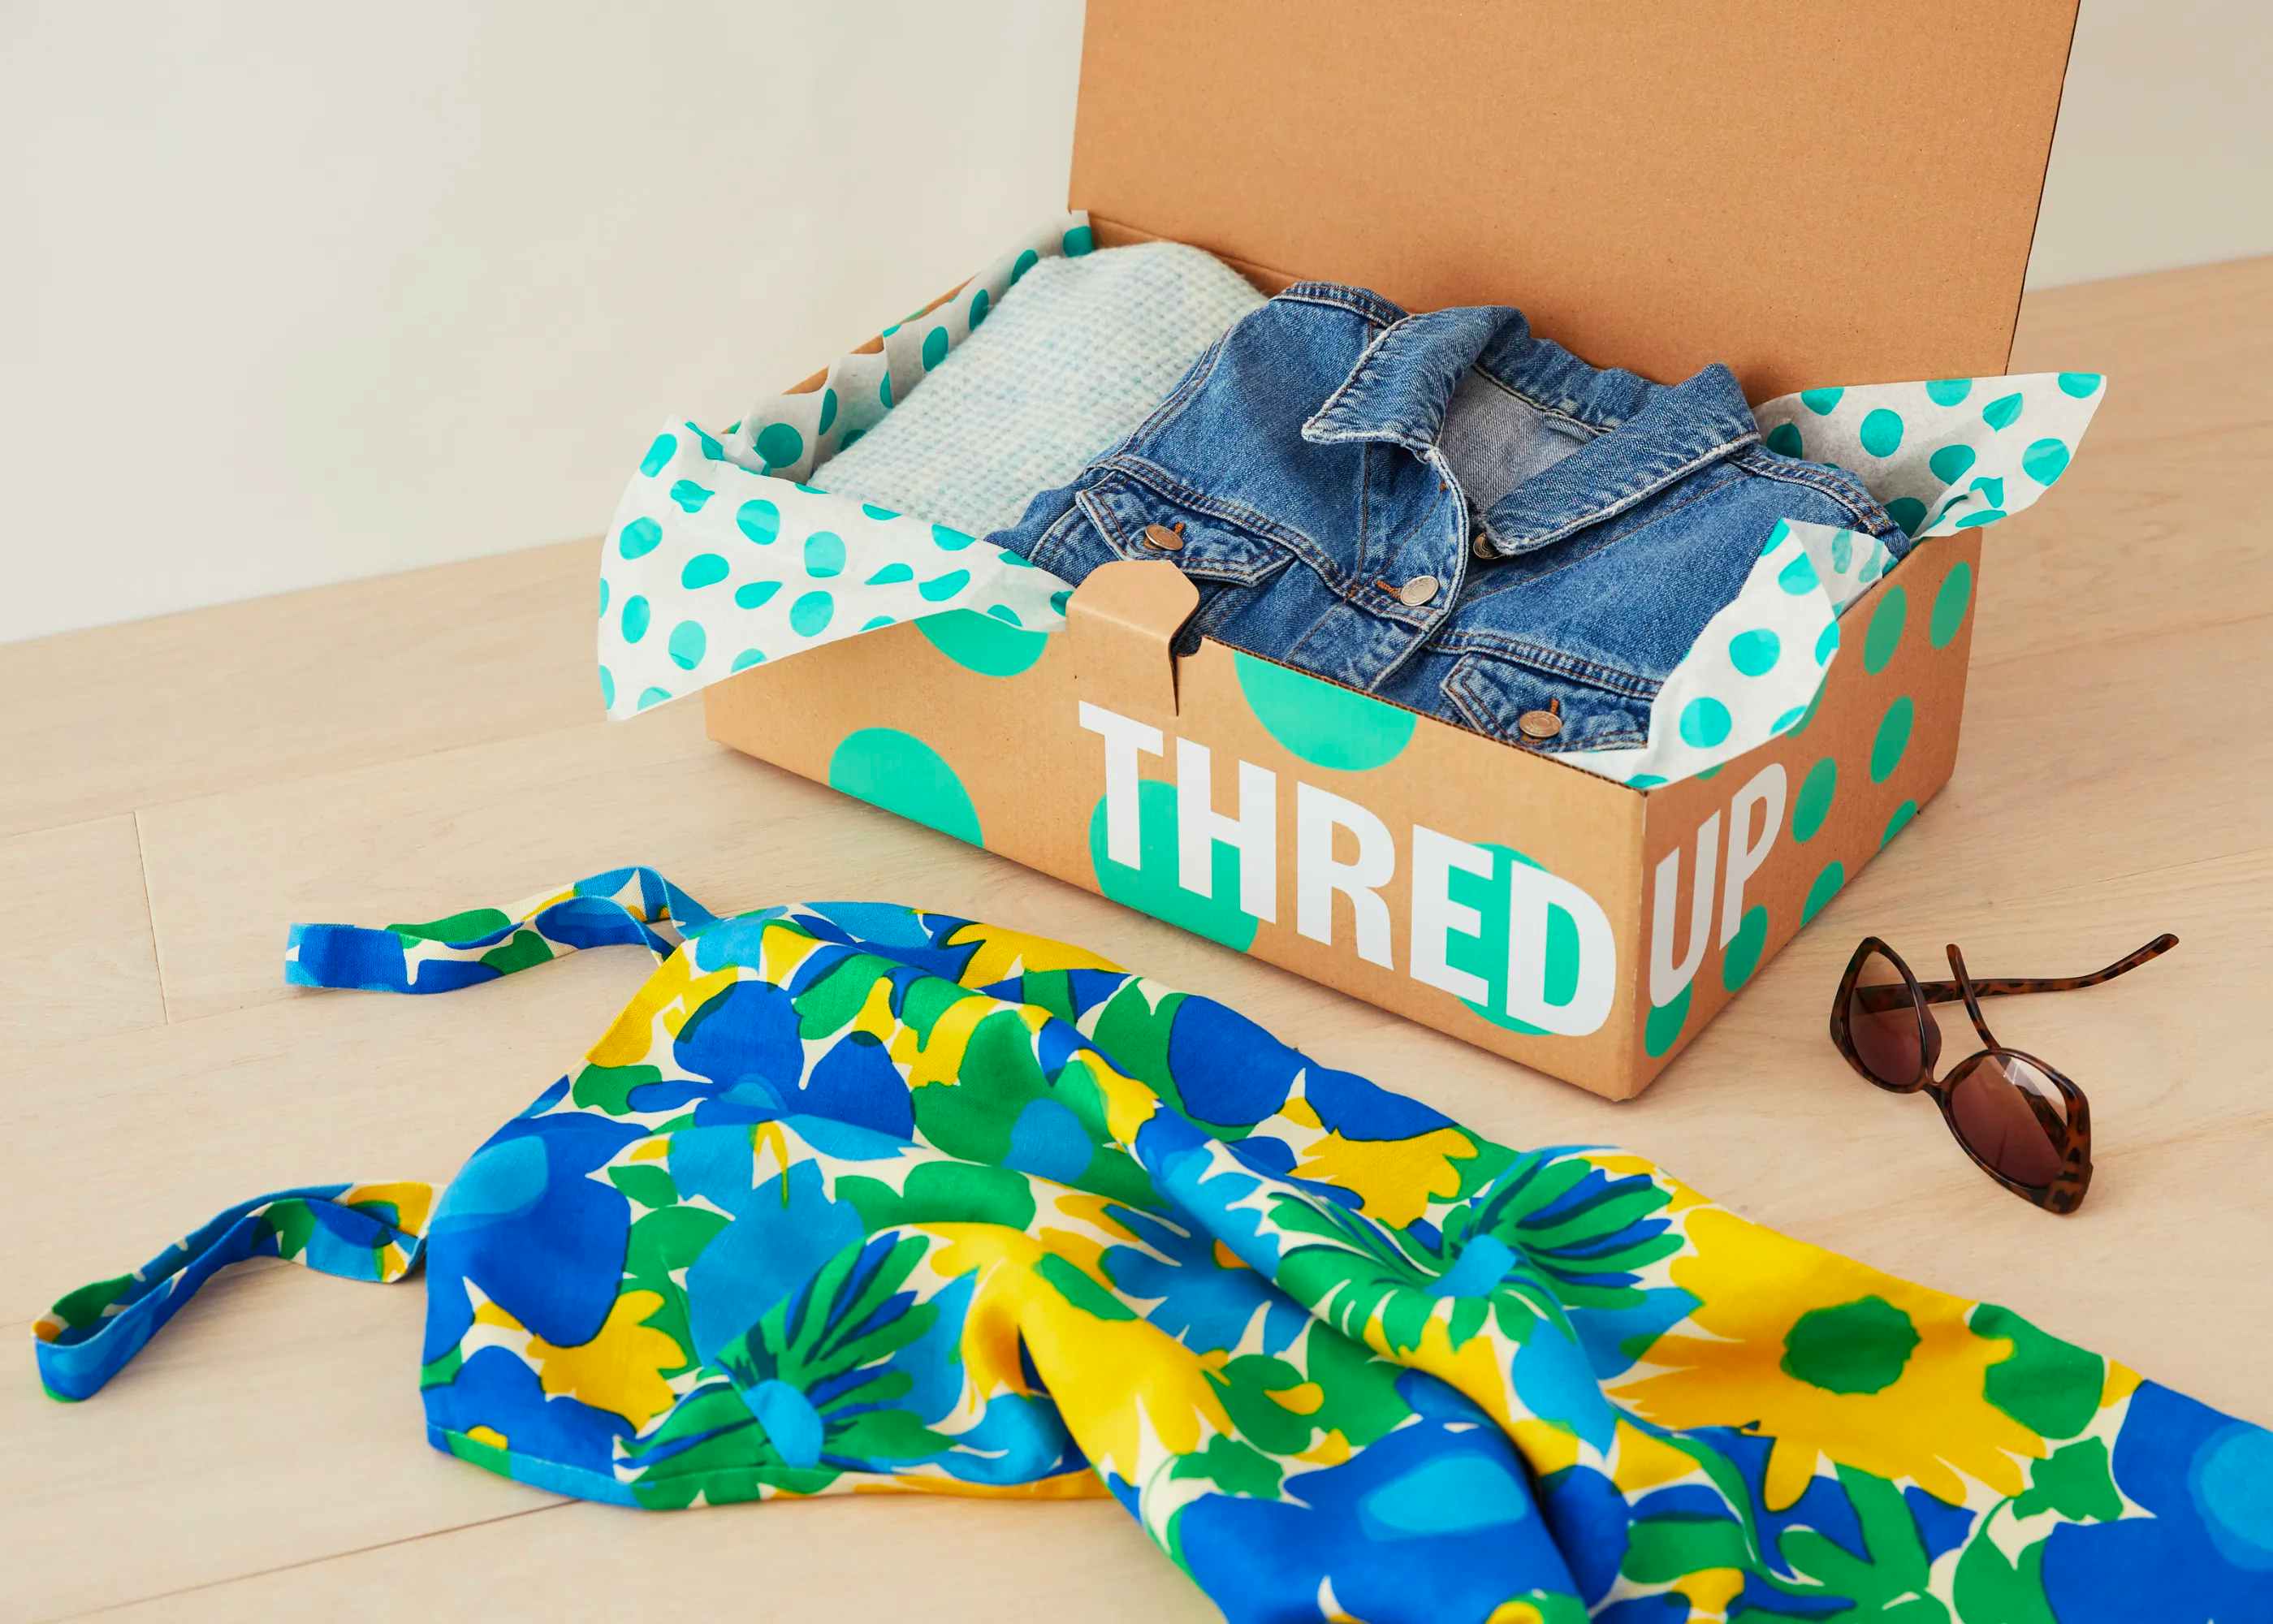 A ThredUp box with a denim jacket inside and some sunglasses and a dress on the table beside the box.